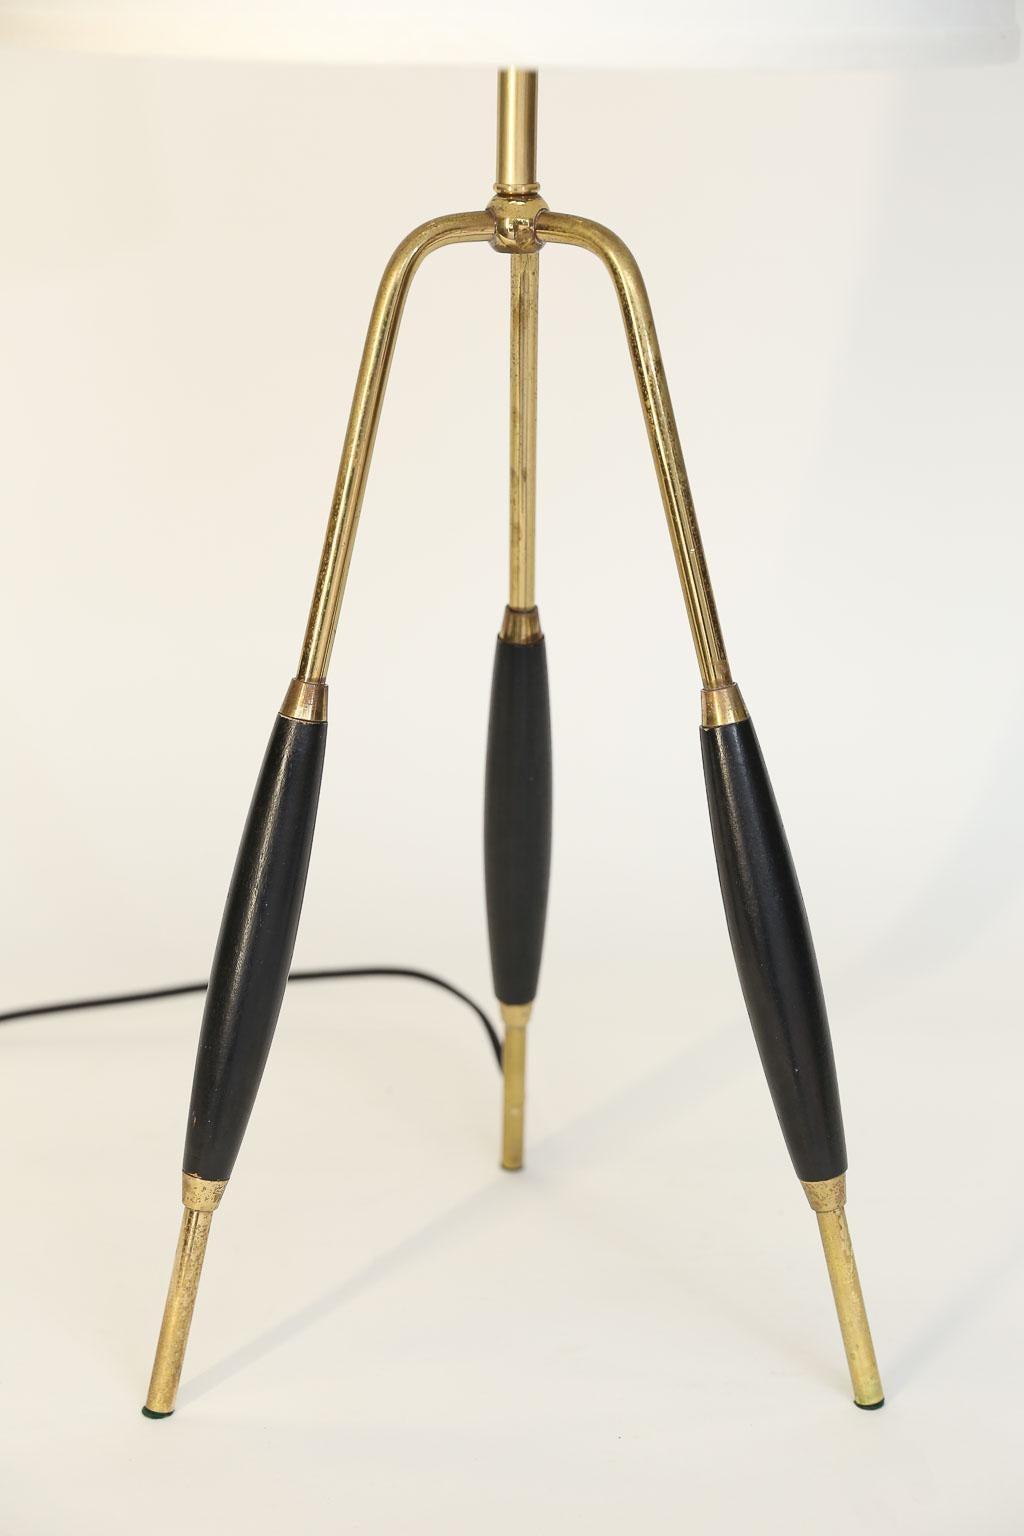 This midcentury tripod table lamp will surely add an updated modern look to any room. The newly wired lamp features a brass and wood tripod base, a new shade and a black cloth cord.